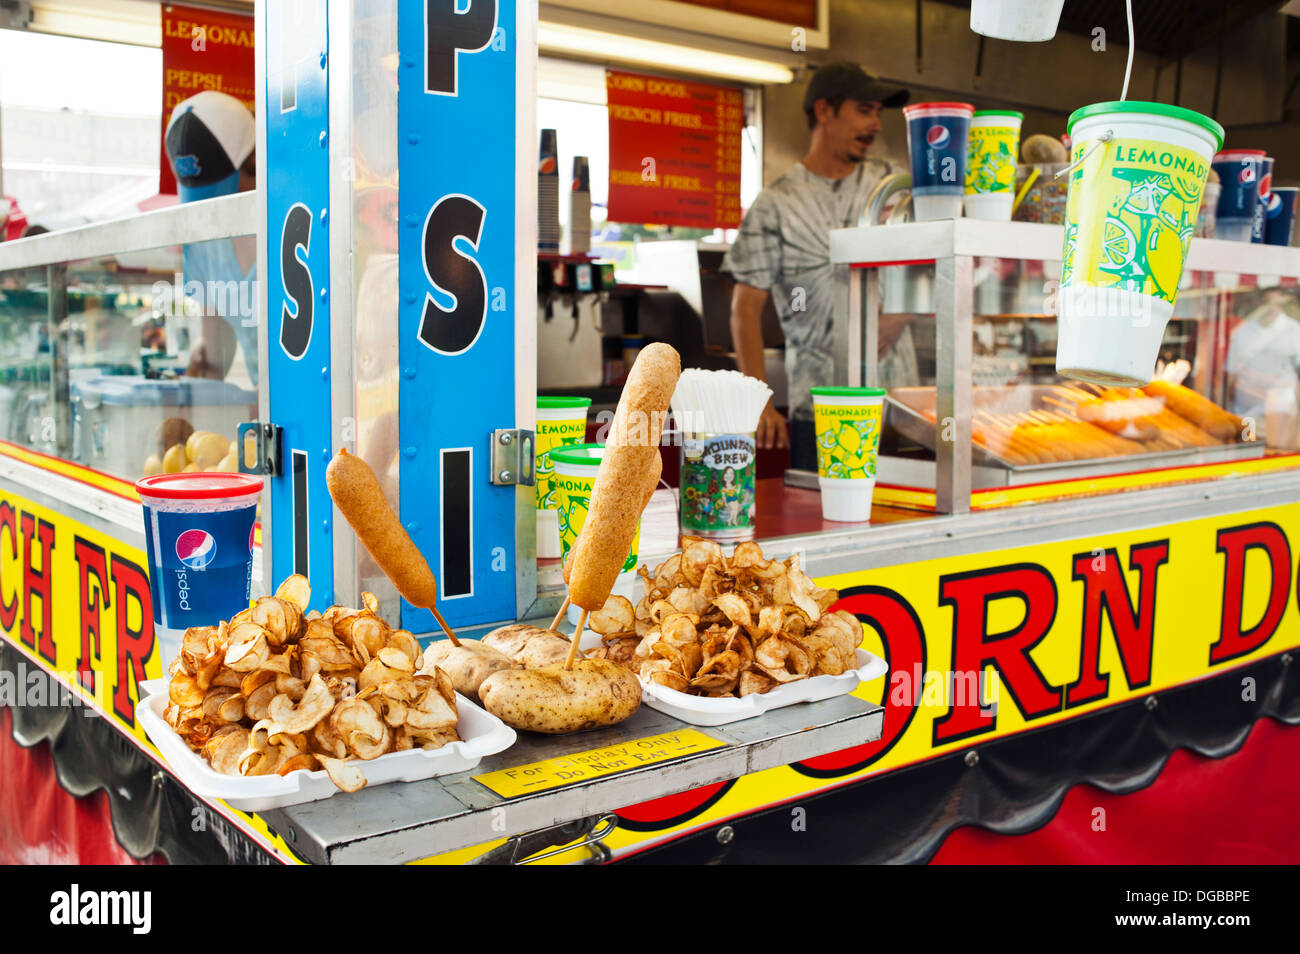 Corn dogs and carnival food at the Mountain State Fair in Asheville North Carolina Stock Photo